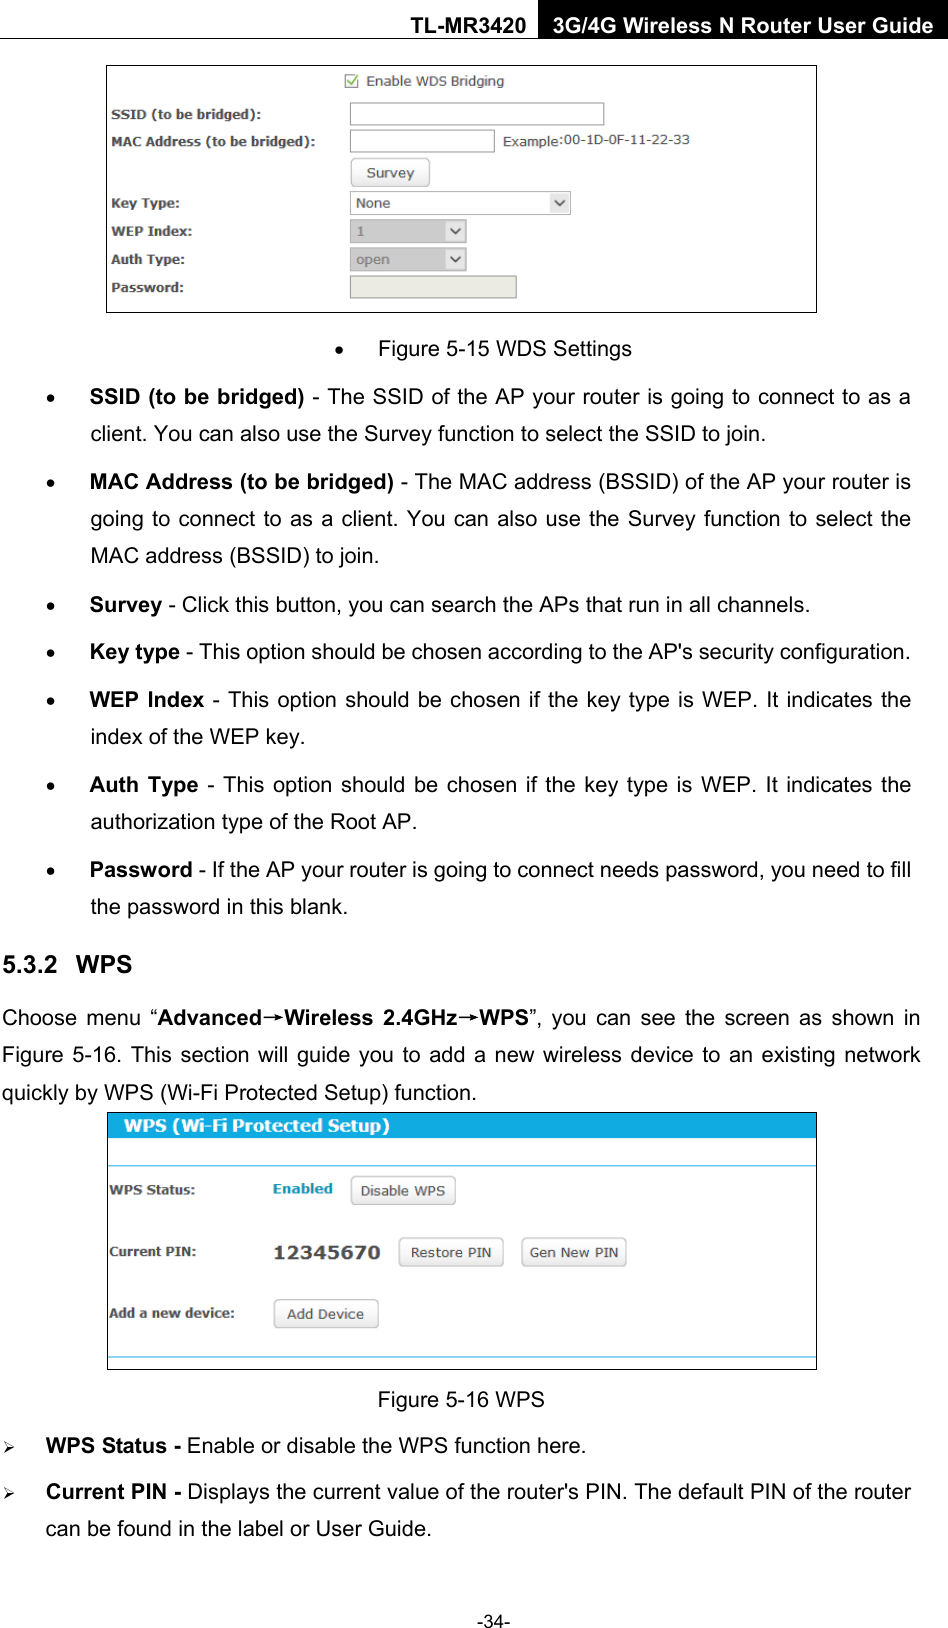    -34- TL-MR3420 3G/4G Wireless N Router User Guide  • Figure 5-15 WDS Settings • SSID (to be bridged) - The SSID of the AP your router is going to connect to as a client. You can also use the Survey function to select the SSID to join. • MAC Address (to be bridged) - The MAC address (BSSID) of the AP your router is going to connect to as a client. You can also use the Survey function to select the MAC address (BSSID) to join. • Survey - Click this button, you can search the APs that run in all channels. • Key type - This option should be chosen according to the AP&apos;s security configuration. • WEP Index - This option should be chosen if the key type is WEP. It indicates the index of the WEP key. • Auth Type - This option should be chosen if the key type is WEP. It indicates the authorization type of the Root AP. • Password - If the AP your router is going to connect needs password, you need to fill the password in this blank. 5.3.2 WPS Choose menu “Advanced→Wireless 2.4GHz→WPS”, you can see the screen as shown in Figure 5-16. This section will guide you to add a new wireless device to an existing network quickly by WPS (Wi-Fi Protected Setup) function.    Figure 5-16 WPS  WPS Status - Enable or disable the WPS function here.    Current PIN - Displays the current value of the router&apos;s PIN. The default PIN of the router can be found in the label or User Guide.   